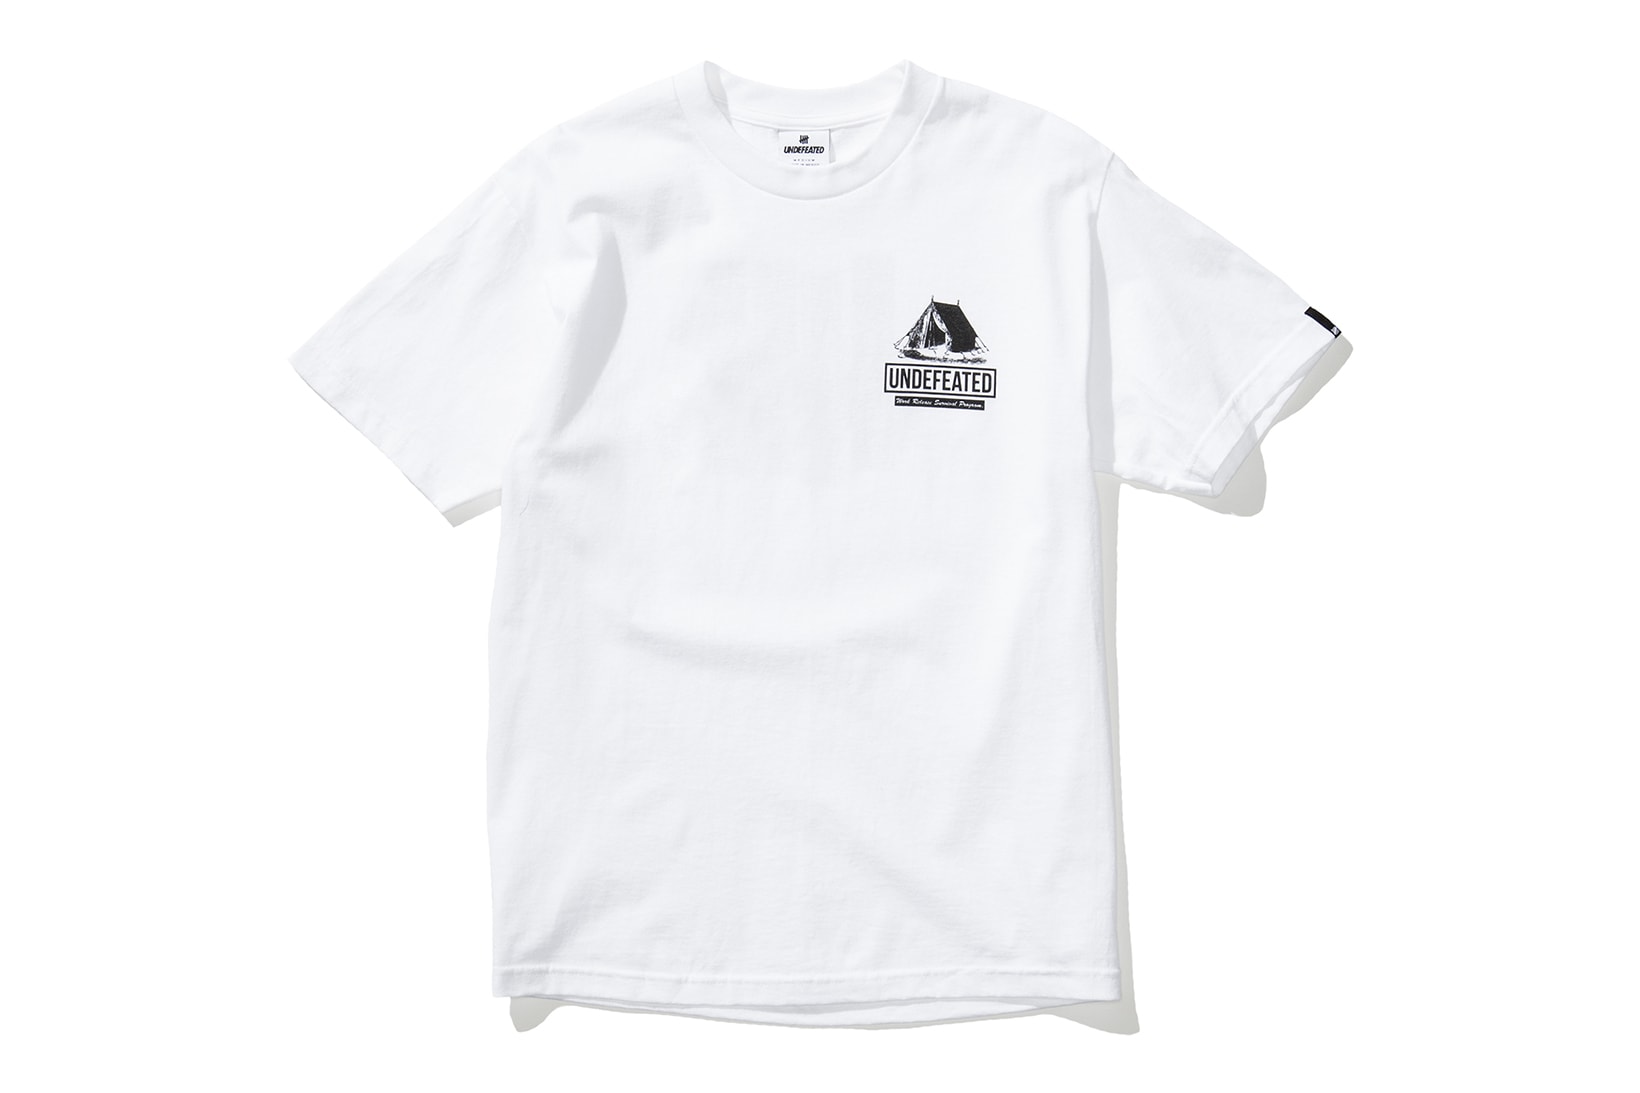 UNDEFEATED UNDFTD Phoenix Suns Grand Opening  Exclusive Tees